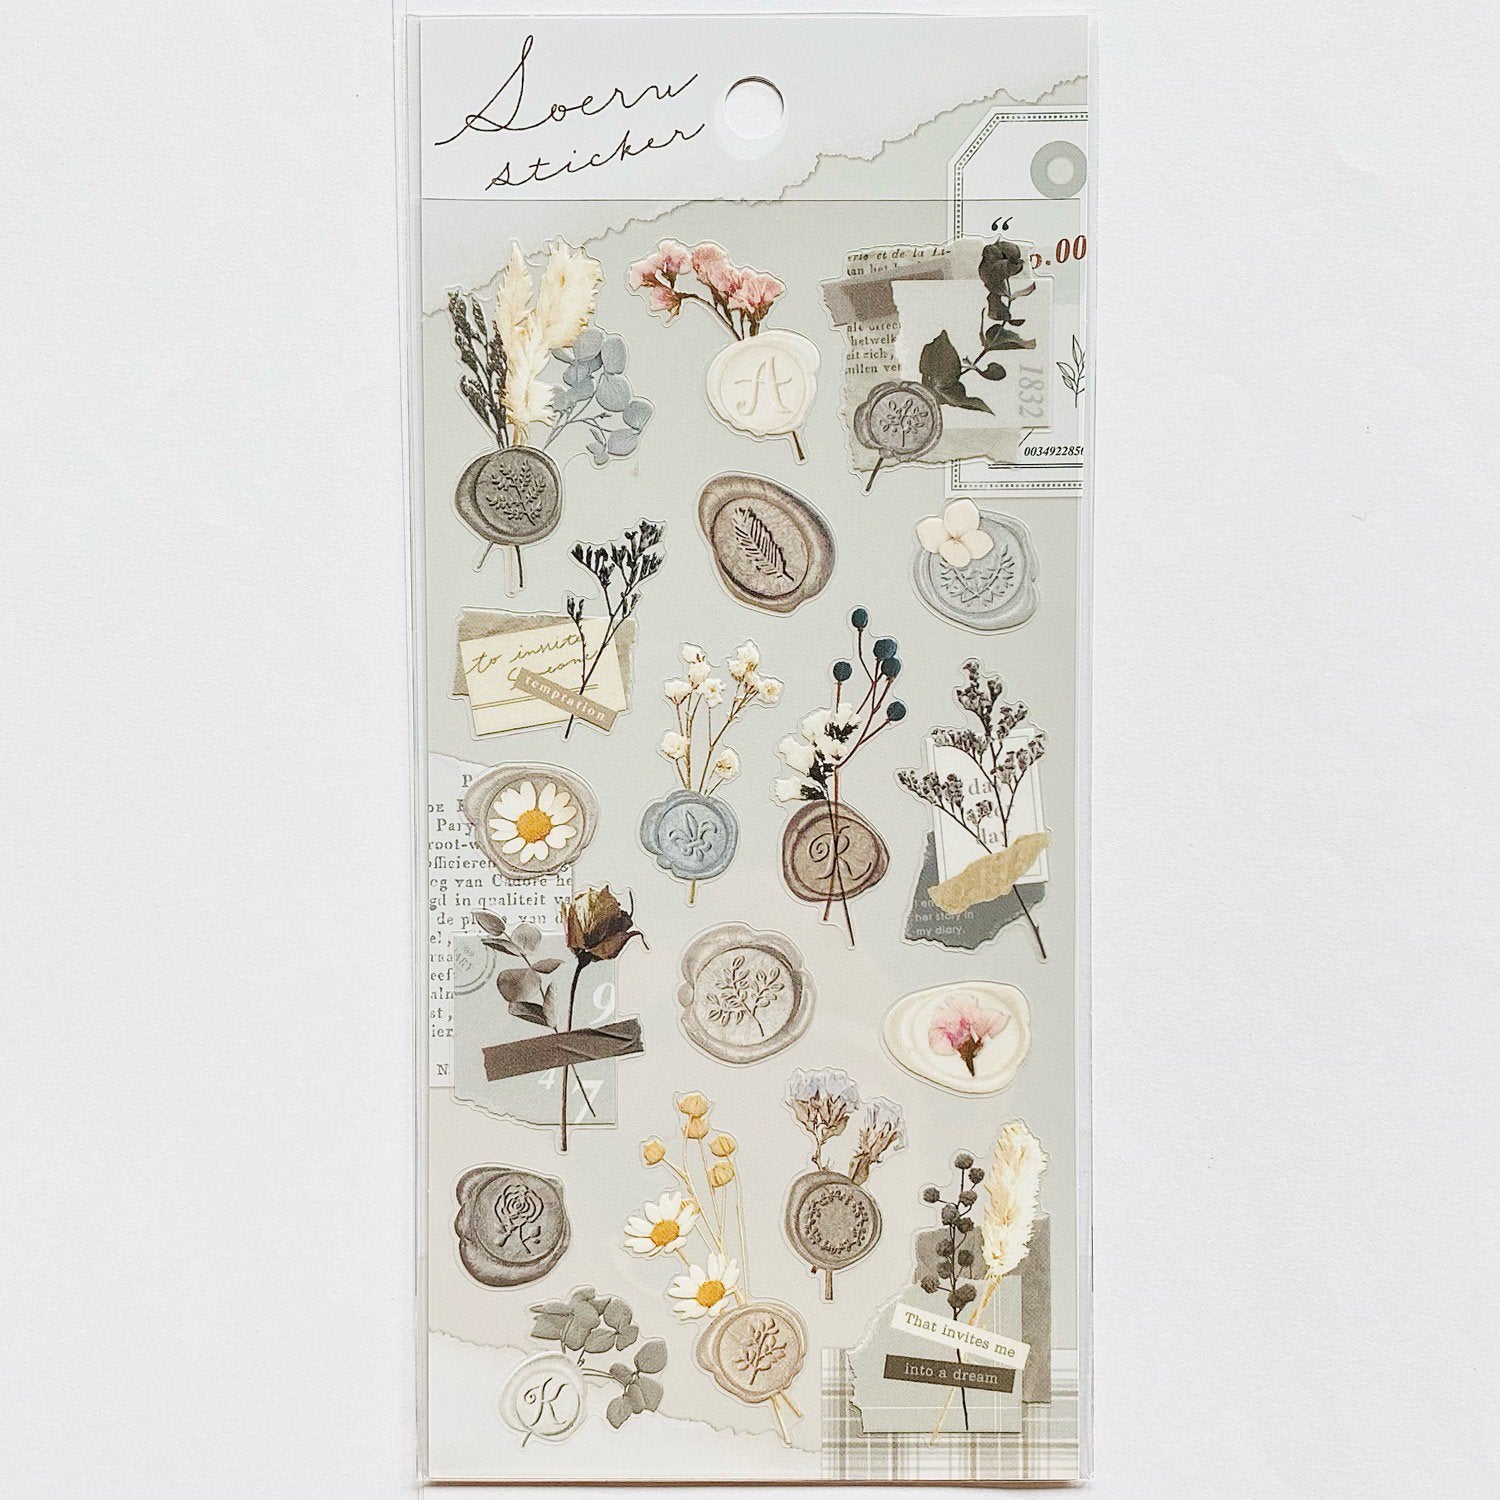 Soeru Sticker Sheet with Floral Wax Seal Pictures - Gray